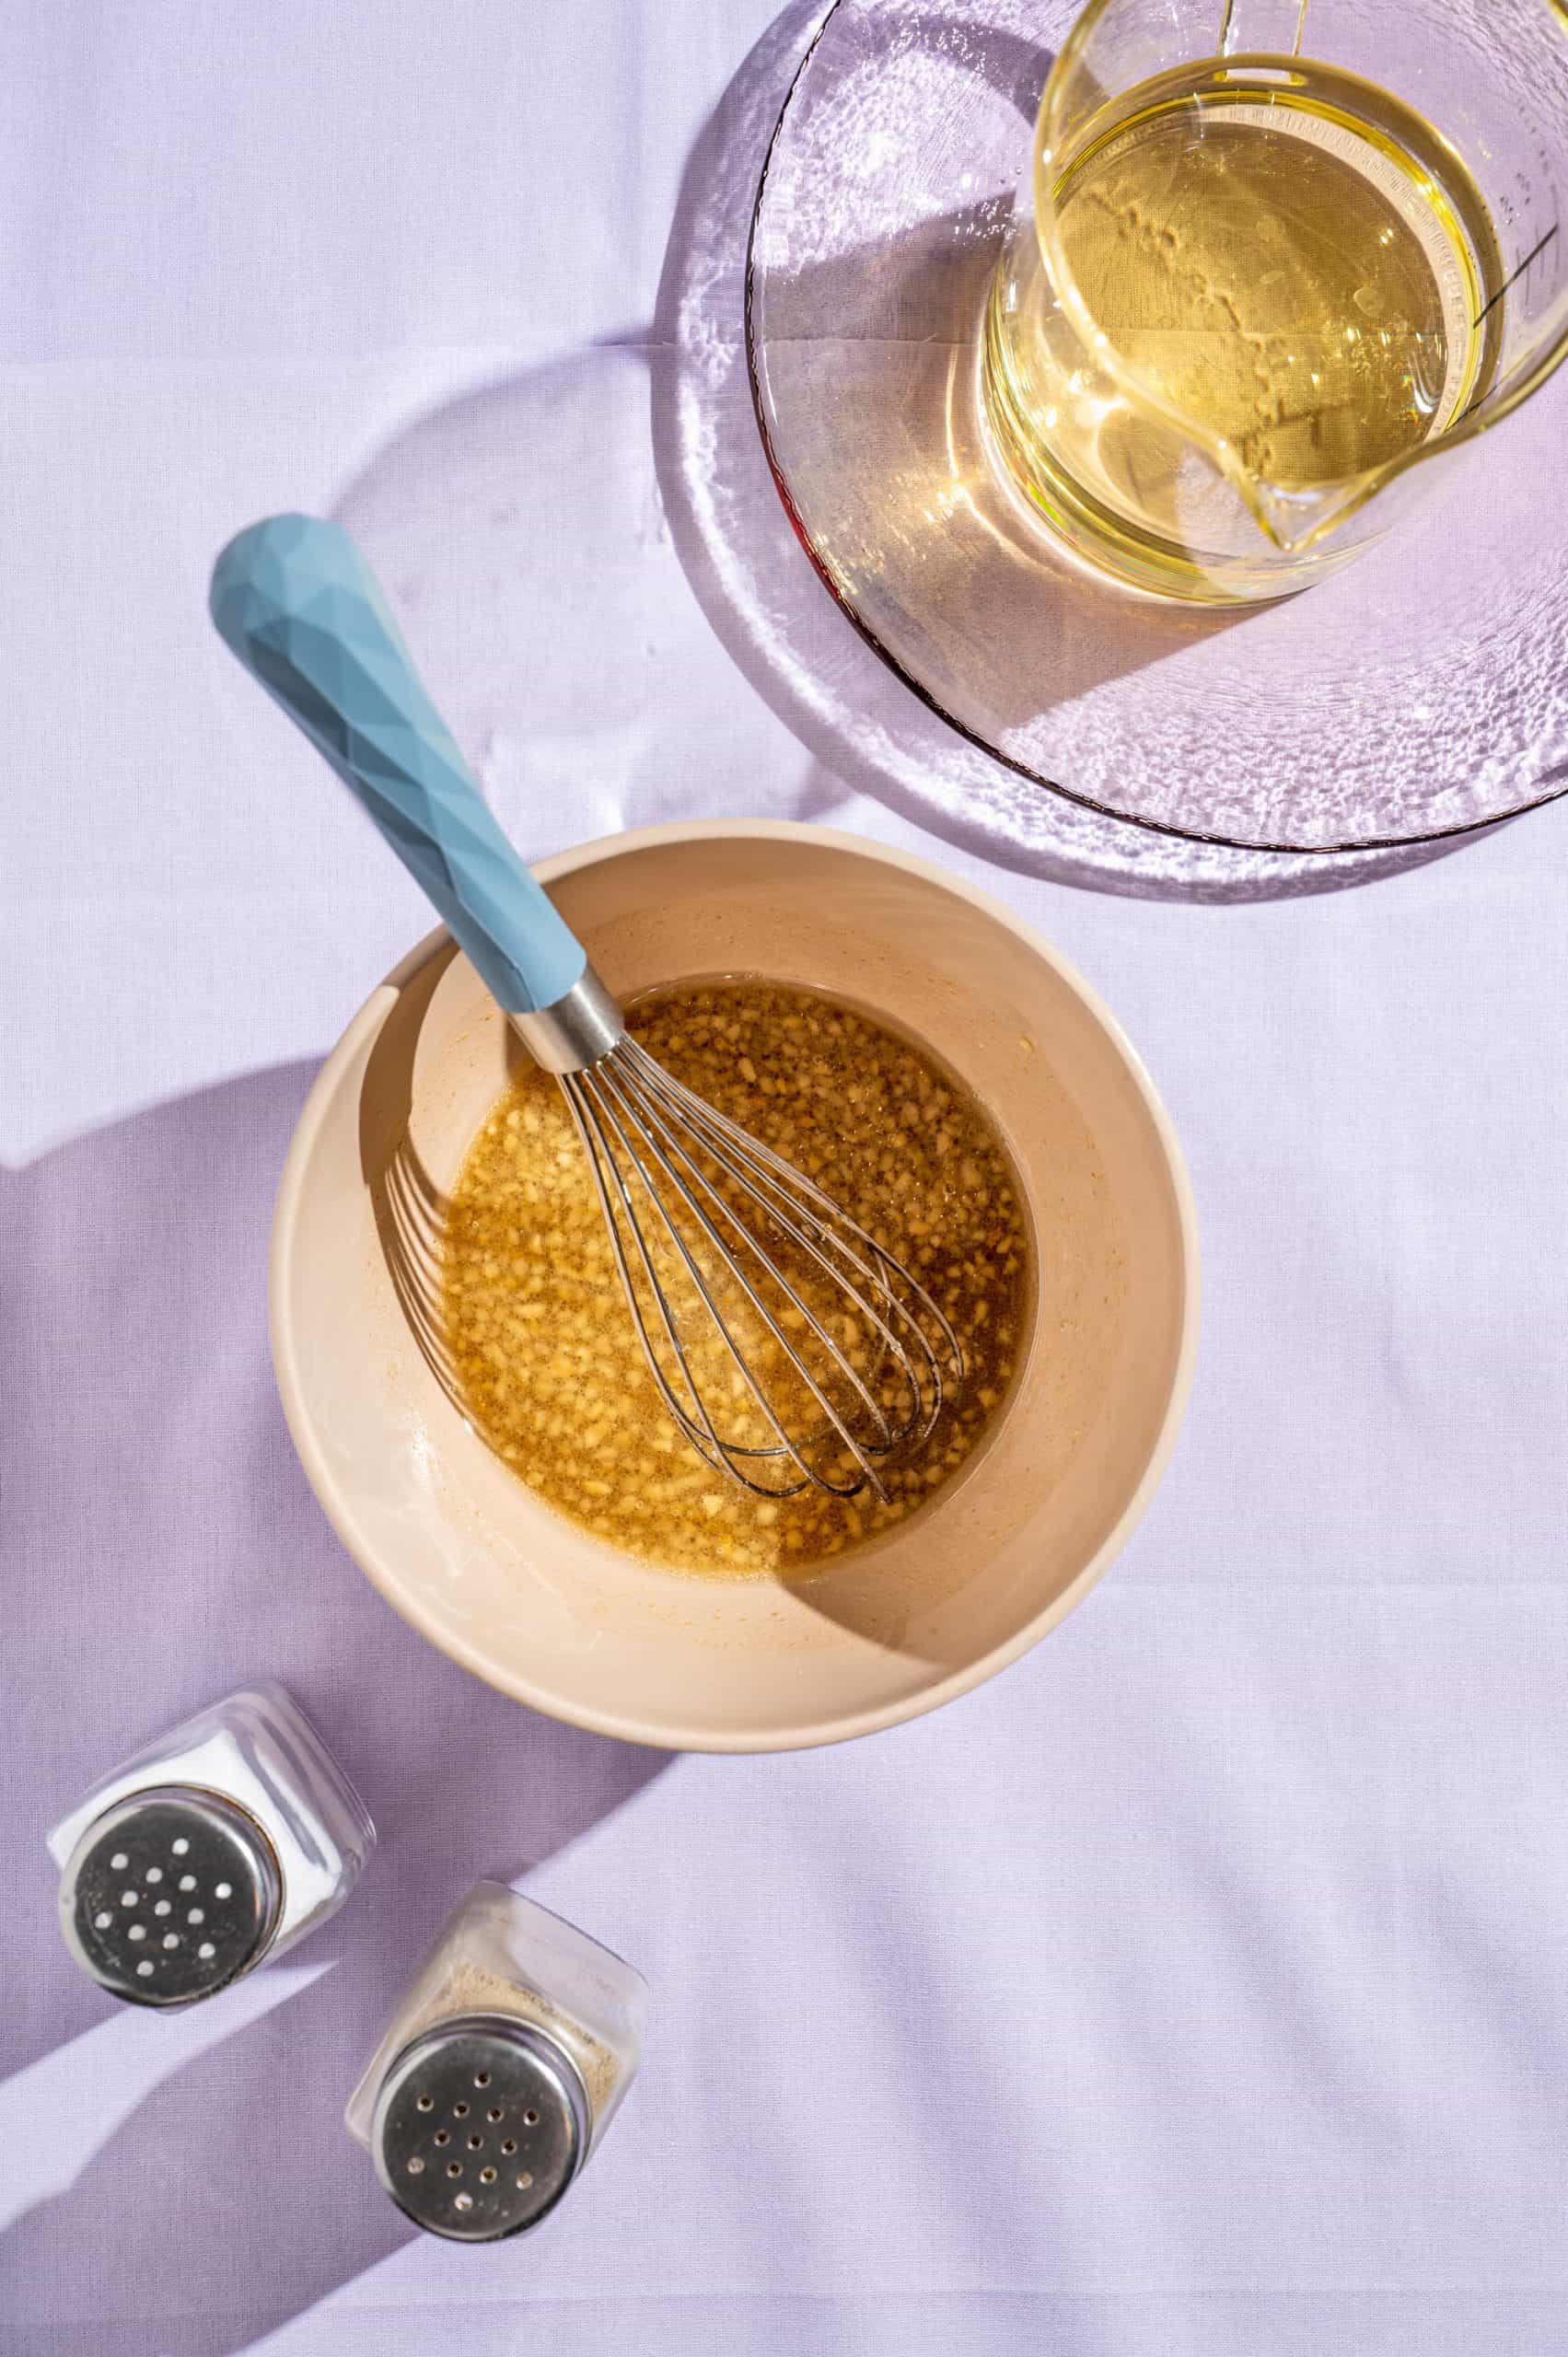 Honey garlic vinaigrette in a small mixing bowl with a whisk, extra oil in a liquid measuring cup on the side.